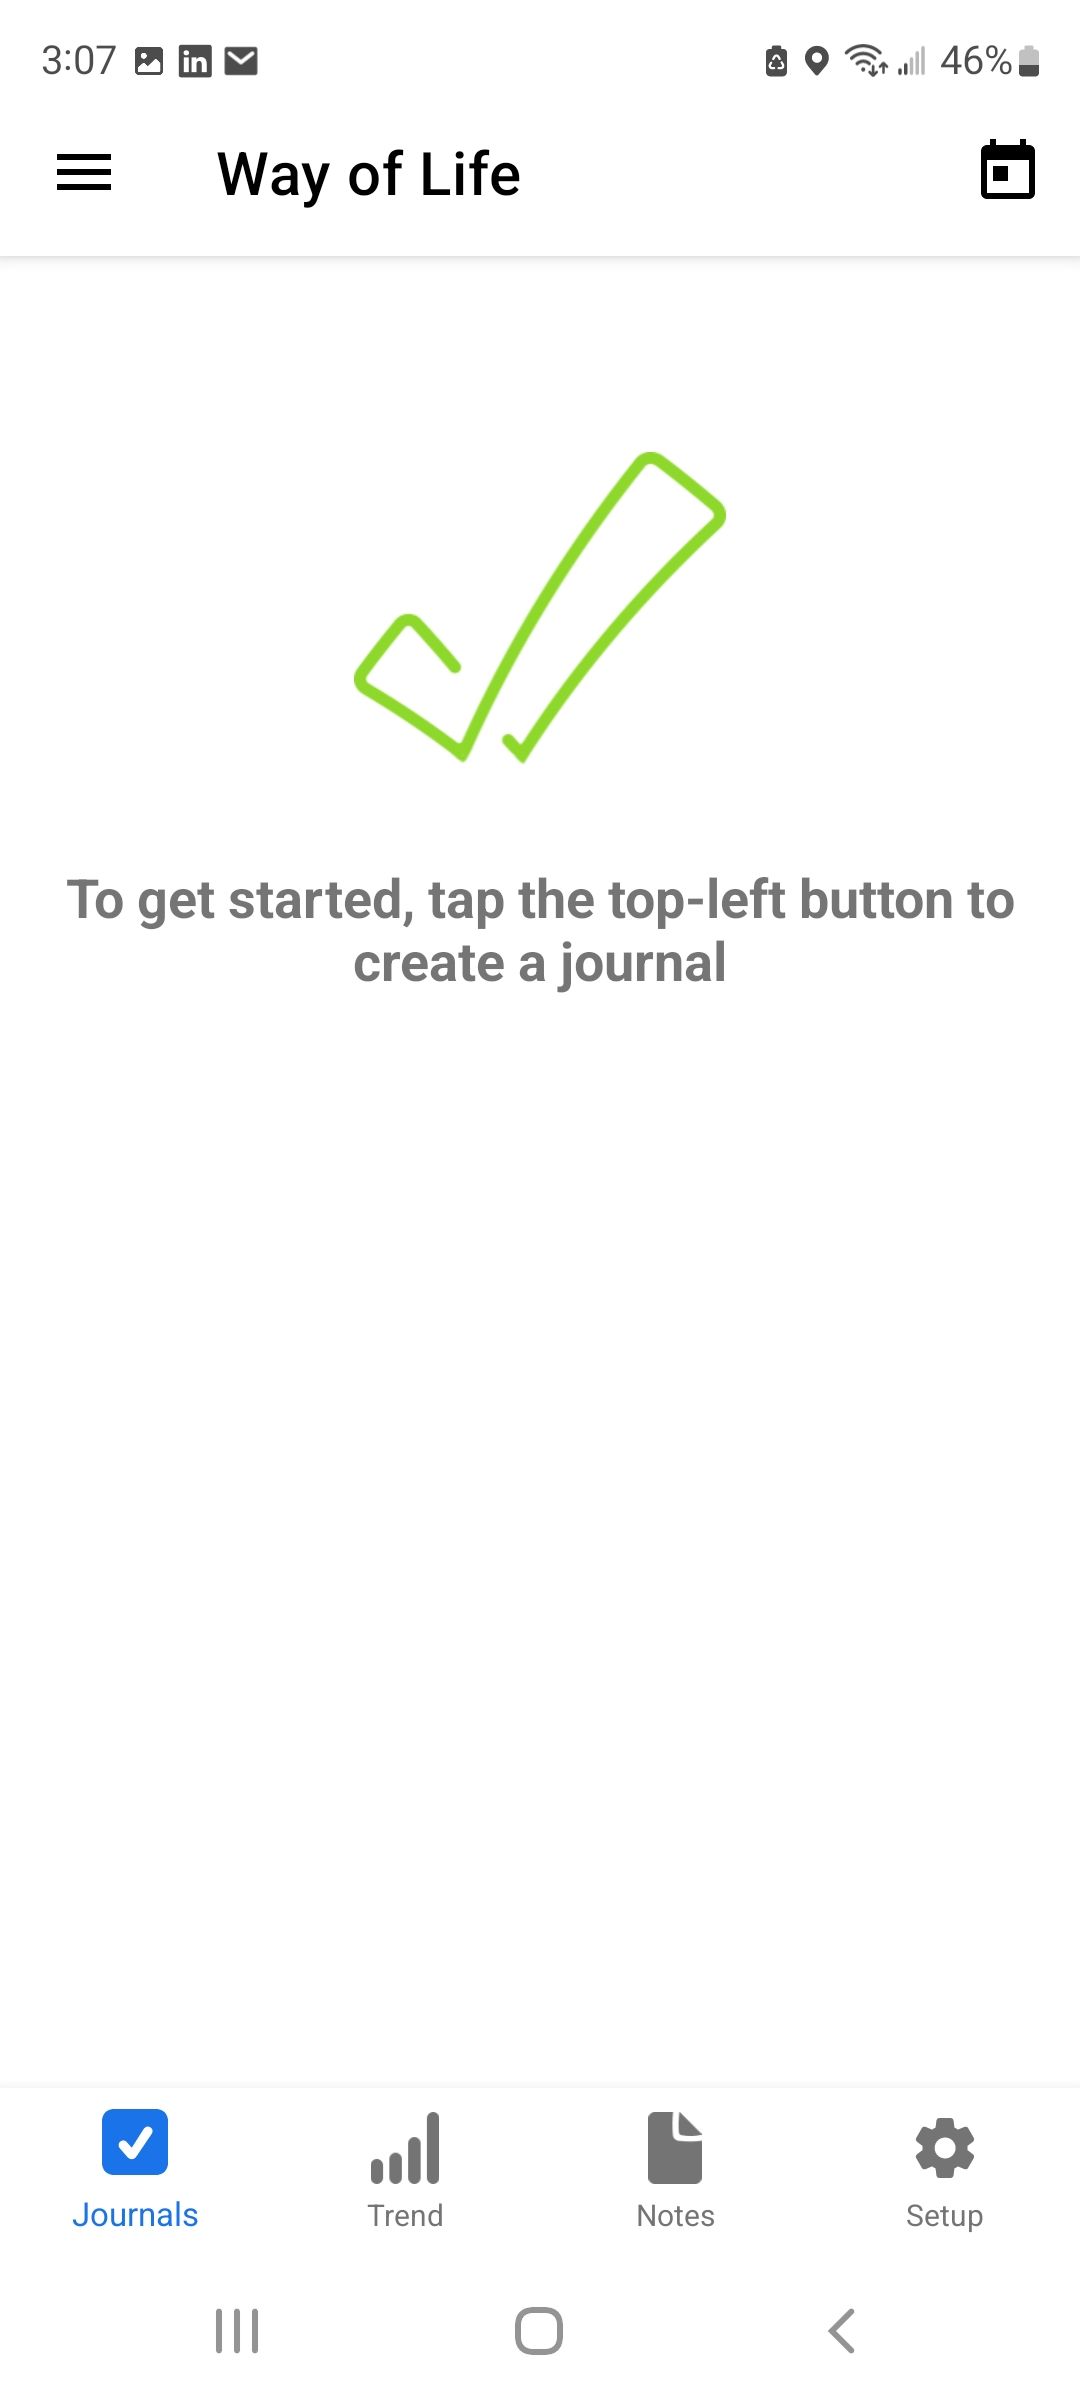 Screenshot of page to start a journal entry in Way of Life app